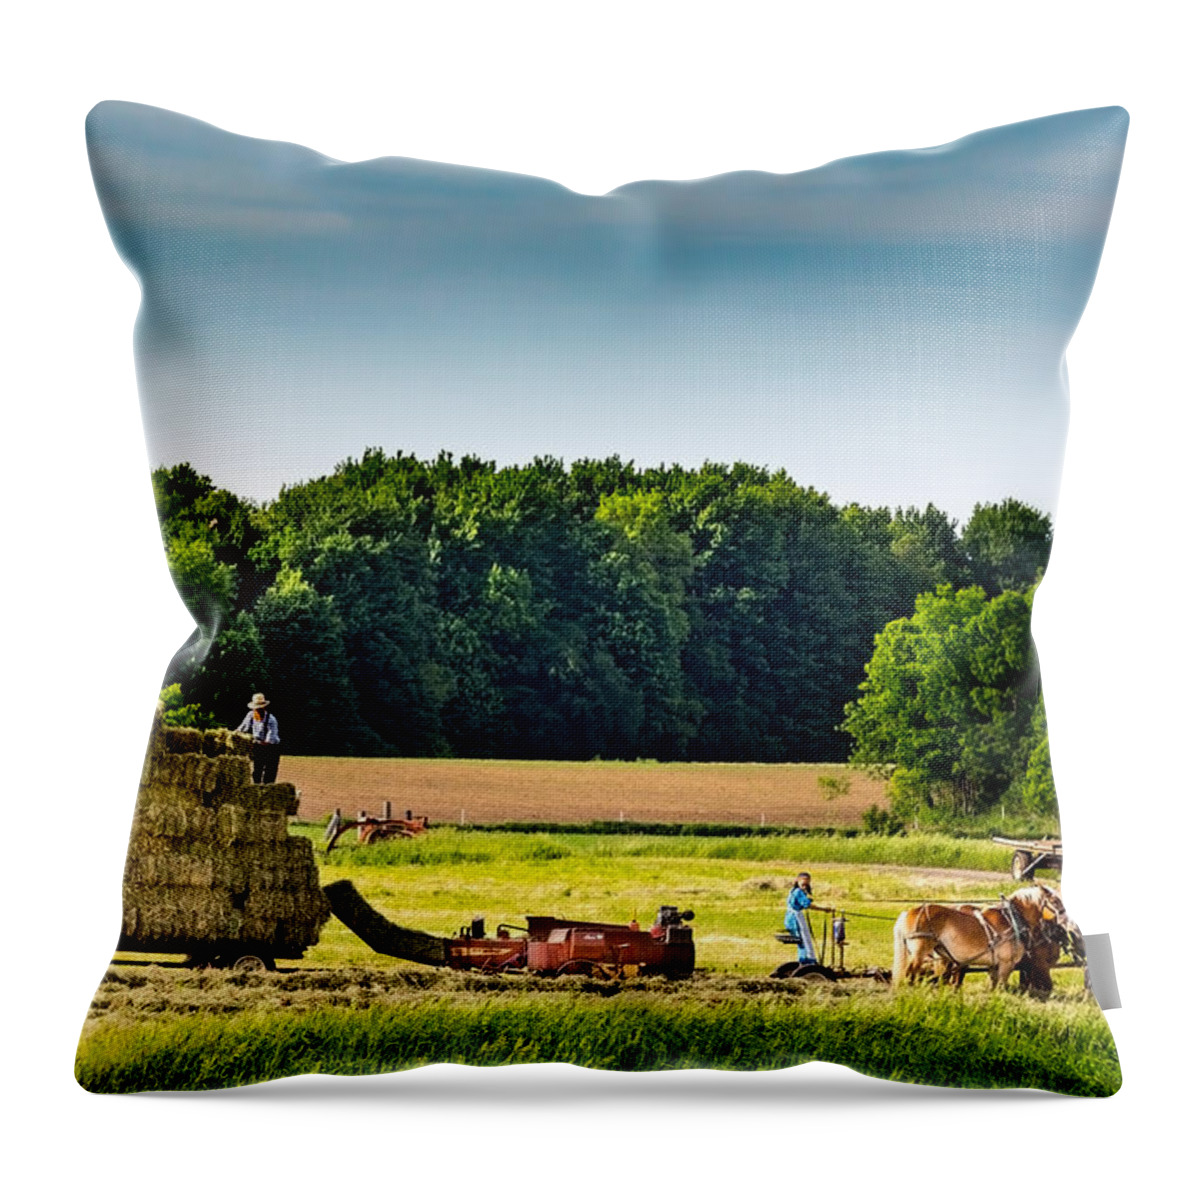 Mennonite Throw Pillow featuring the photograph The Hay Bales by Brent Buchner